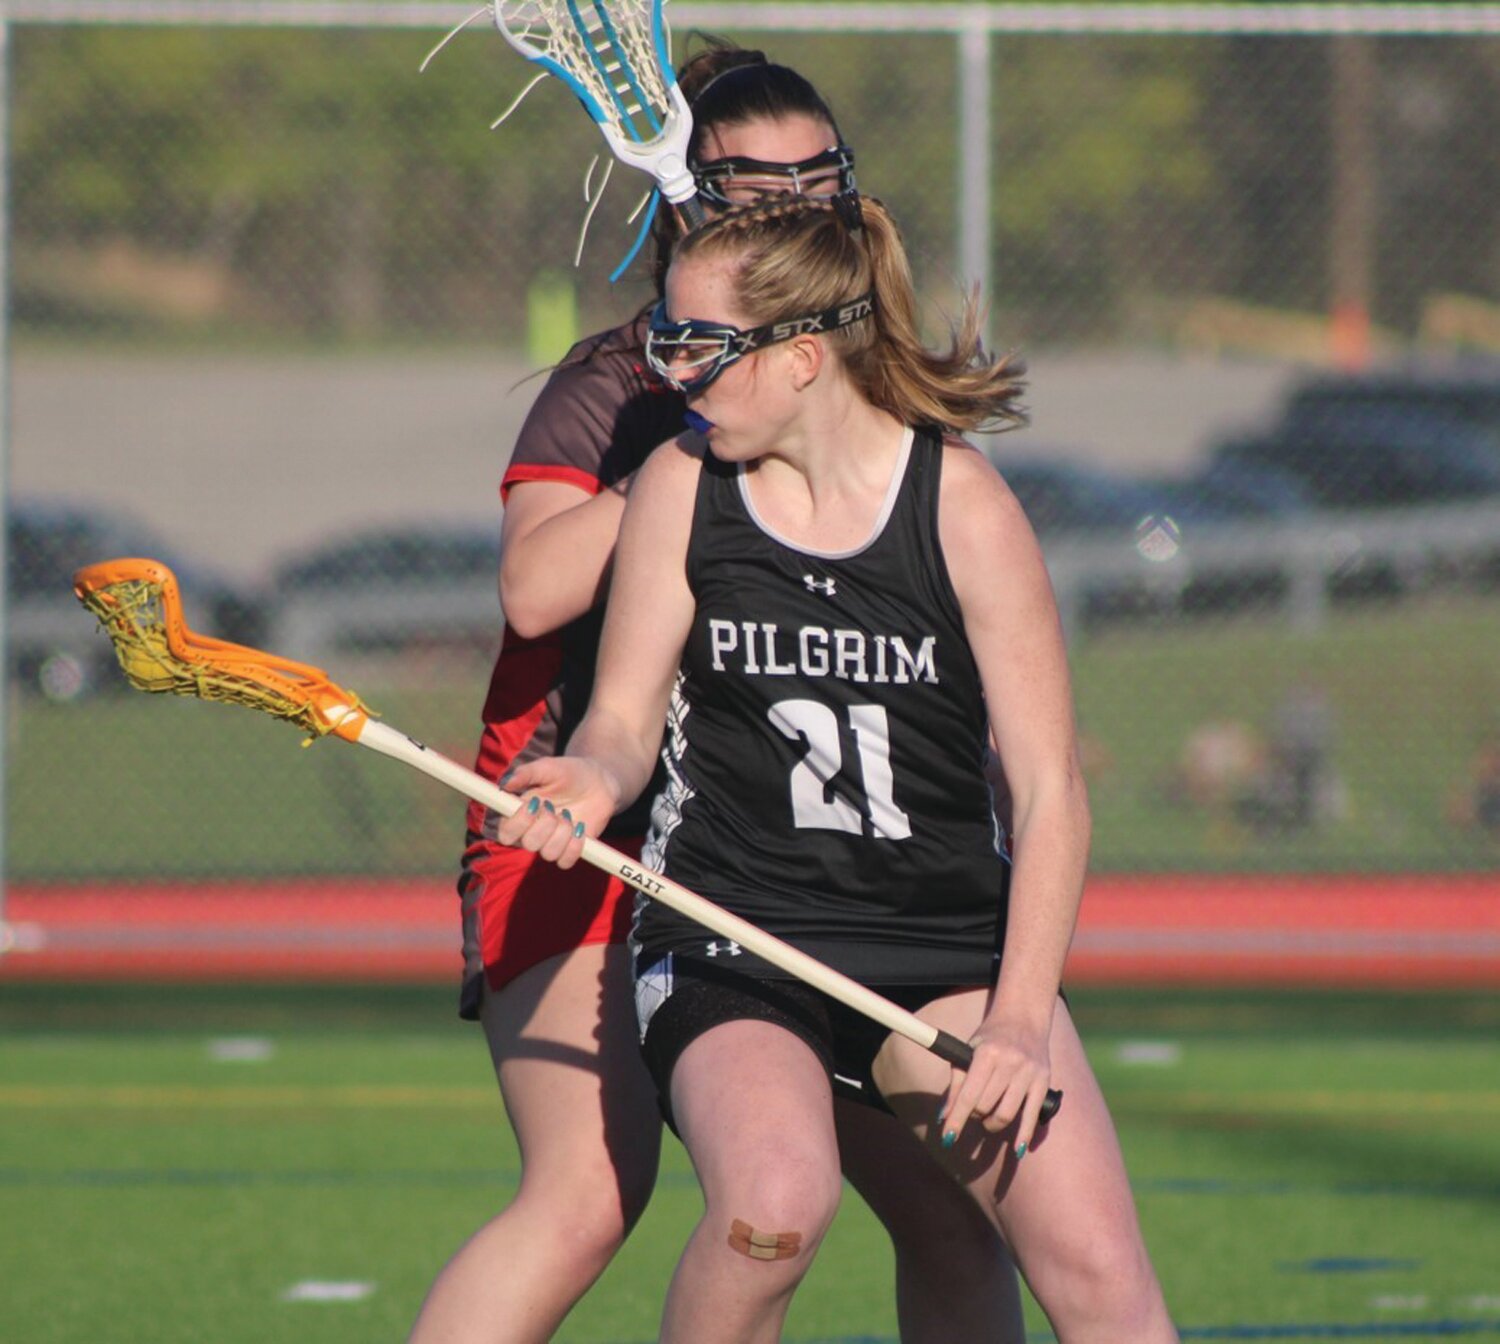 THROUGH TRAFFIC: Pilgrim’s Lily Farrell works past a West defender.